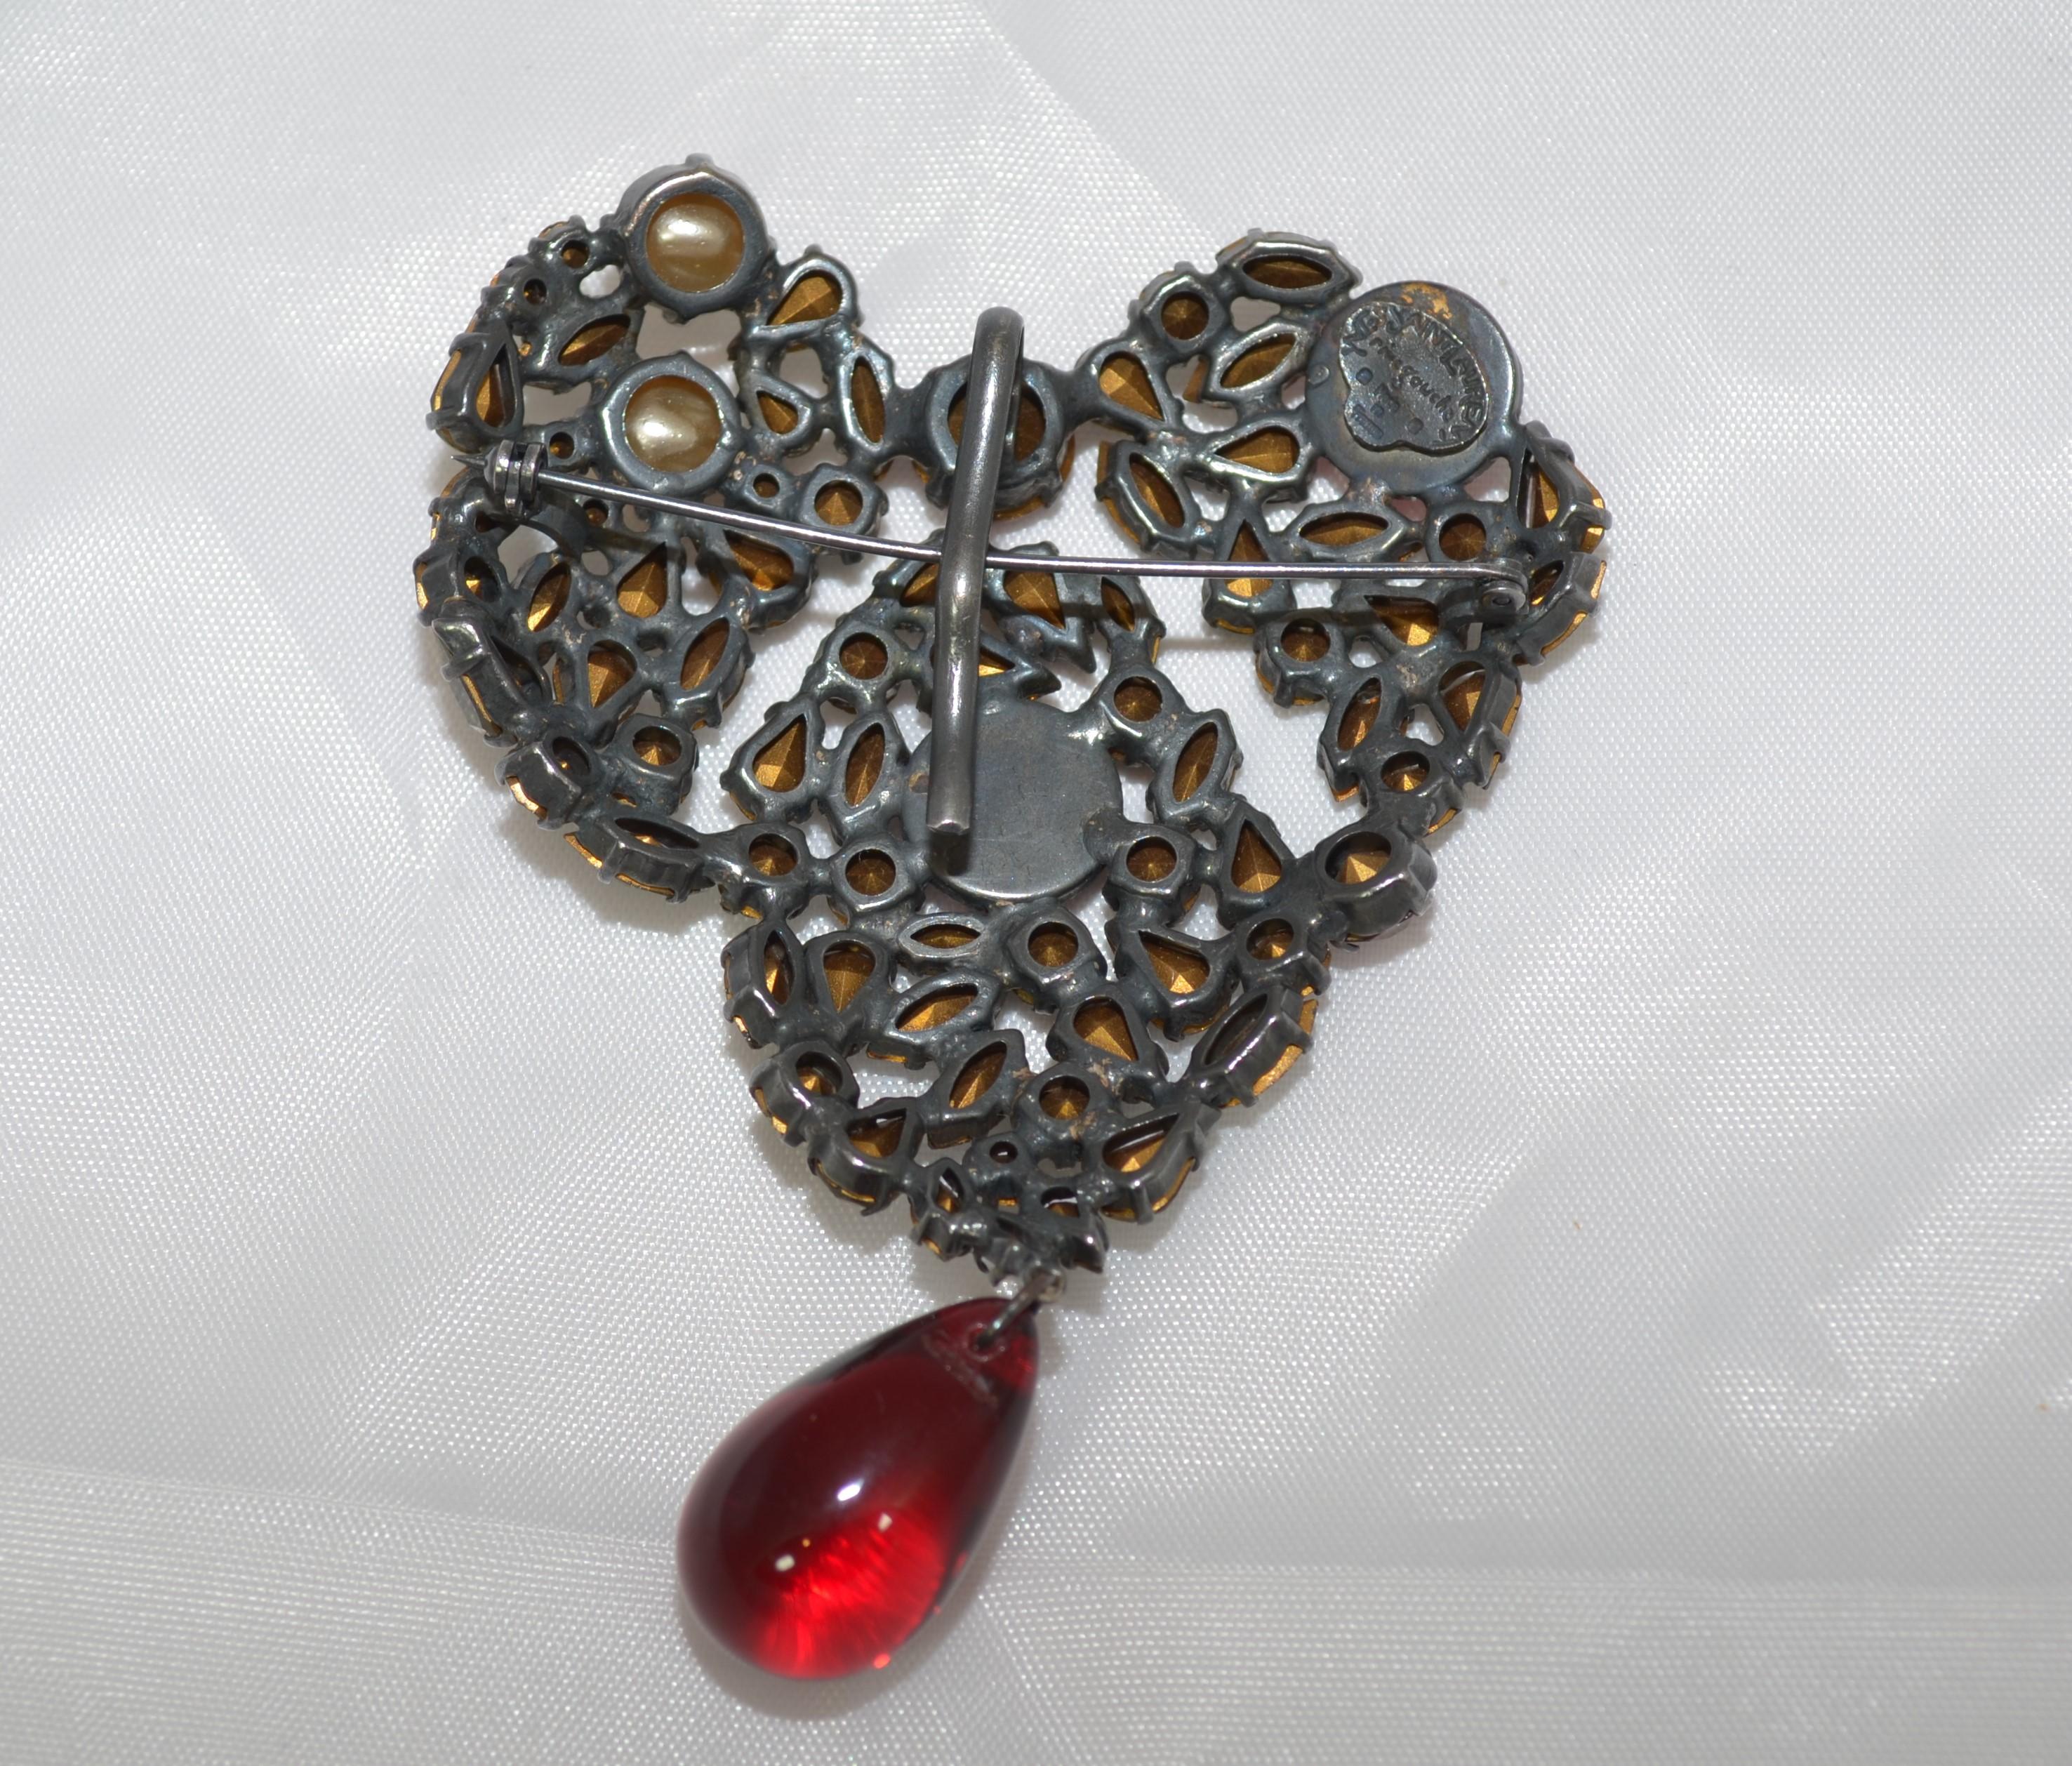 Vintage 1980's YSL Rive Gauche Heart Brooch/Pendant with Pearls 4